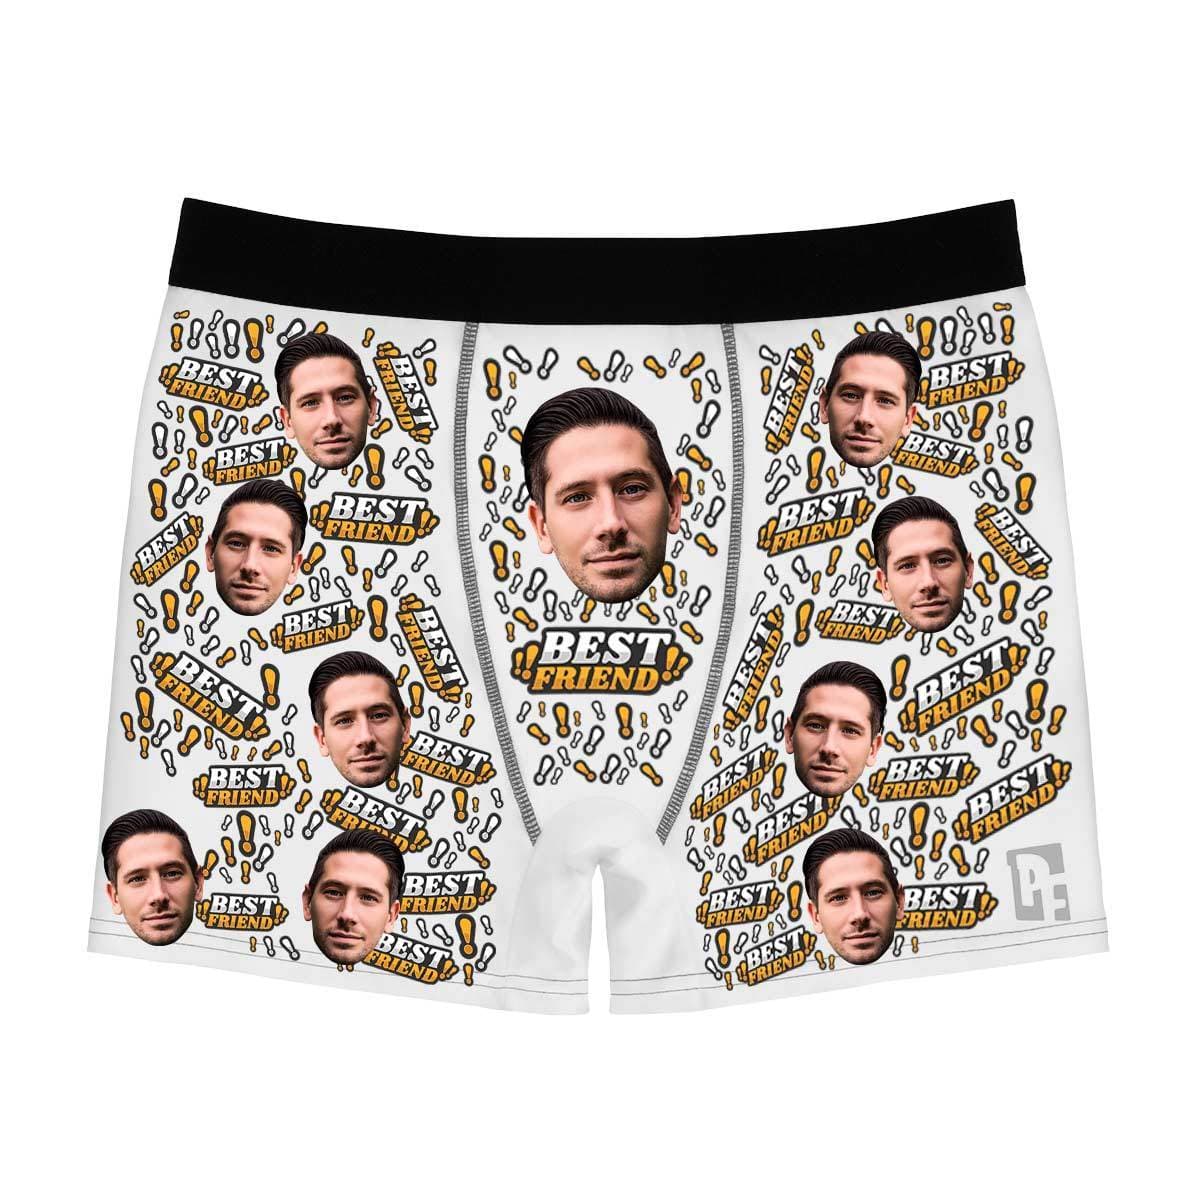 White Best Friend men's boxer briefs personalized with photo printed on them